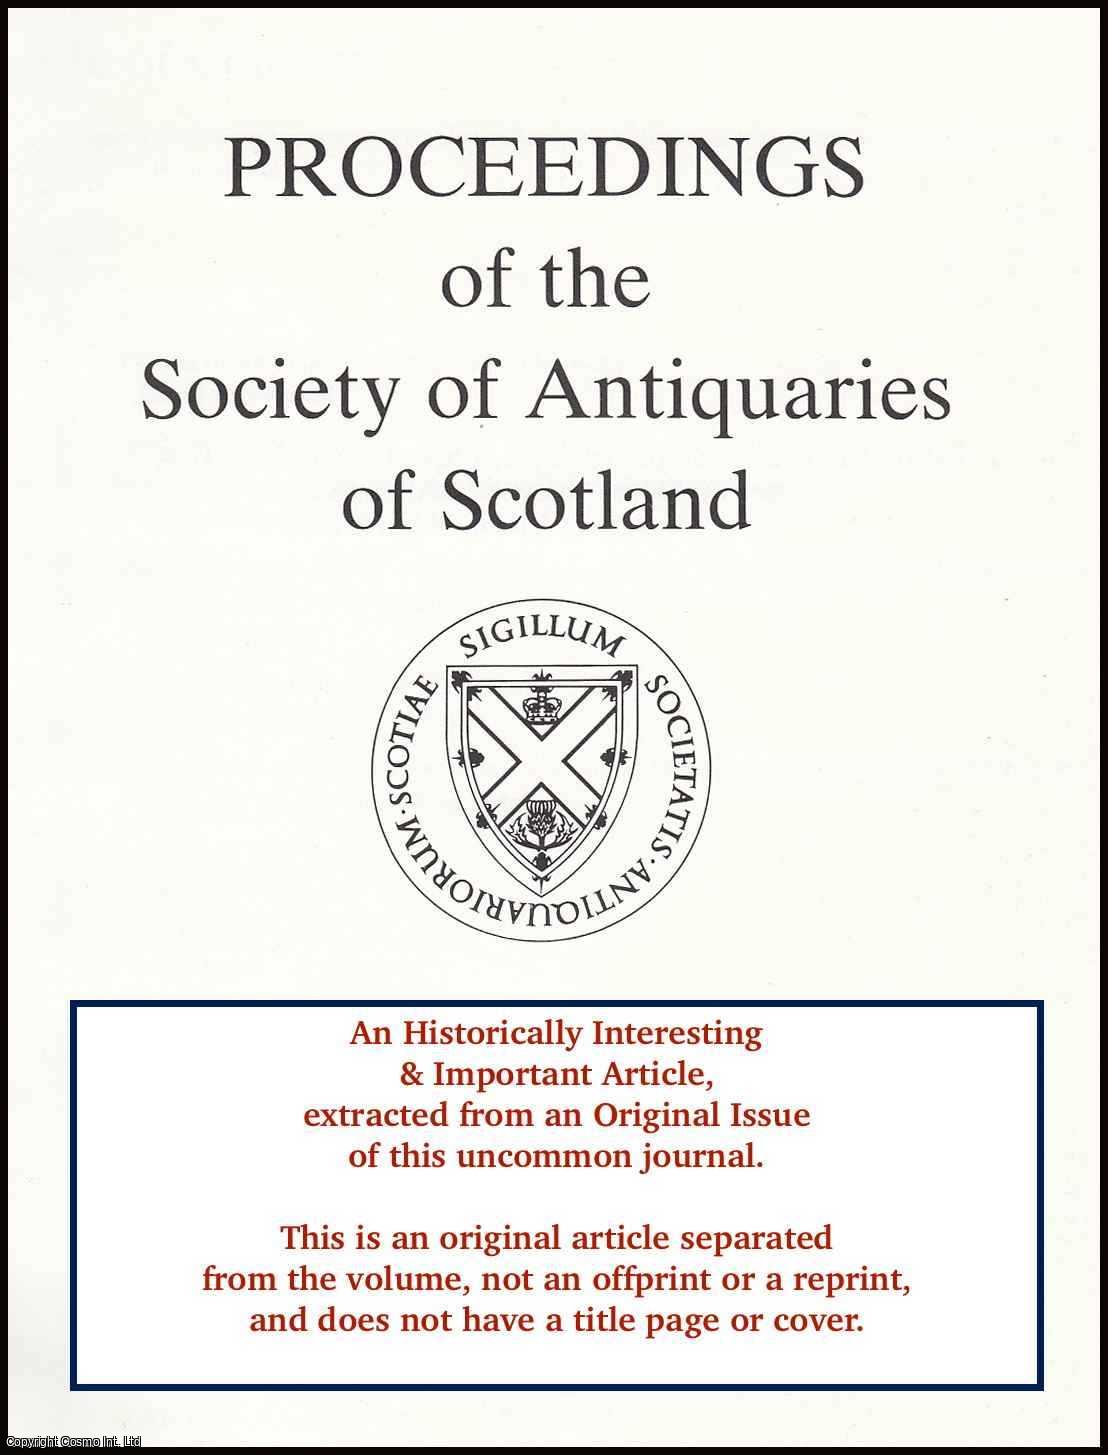 Joseph Bain - The Male Representation of The Morays of Bothwell, Duffus. An original article from the Proceedings of the Society of Antiquaries of Scotland, 1889-90.